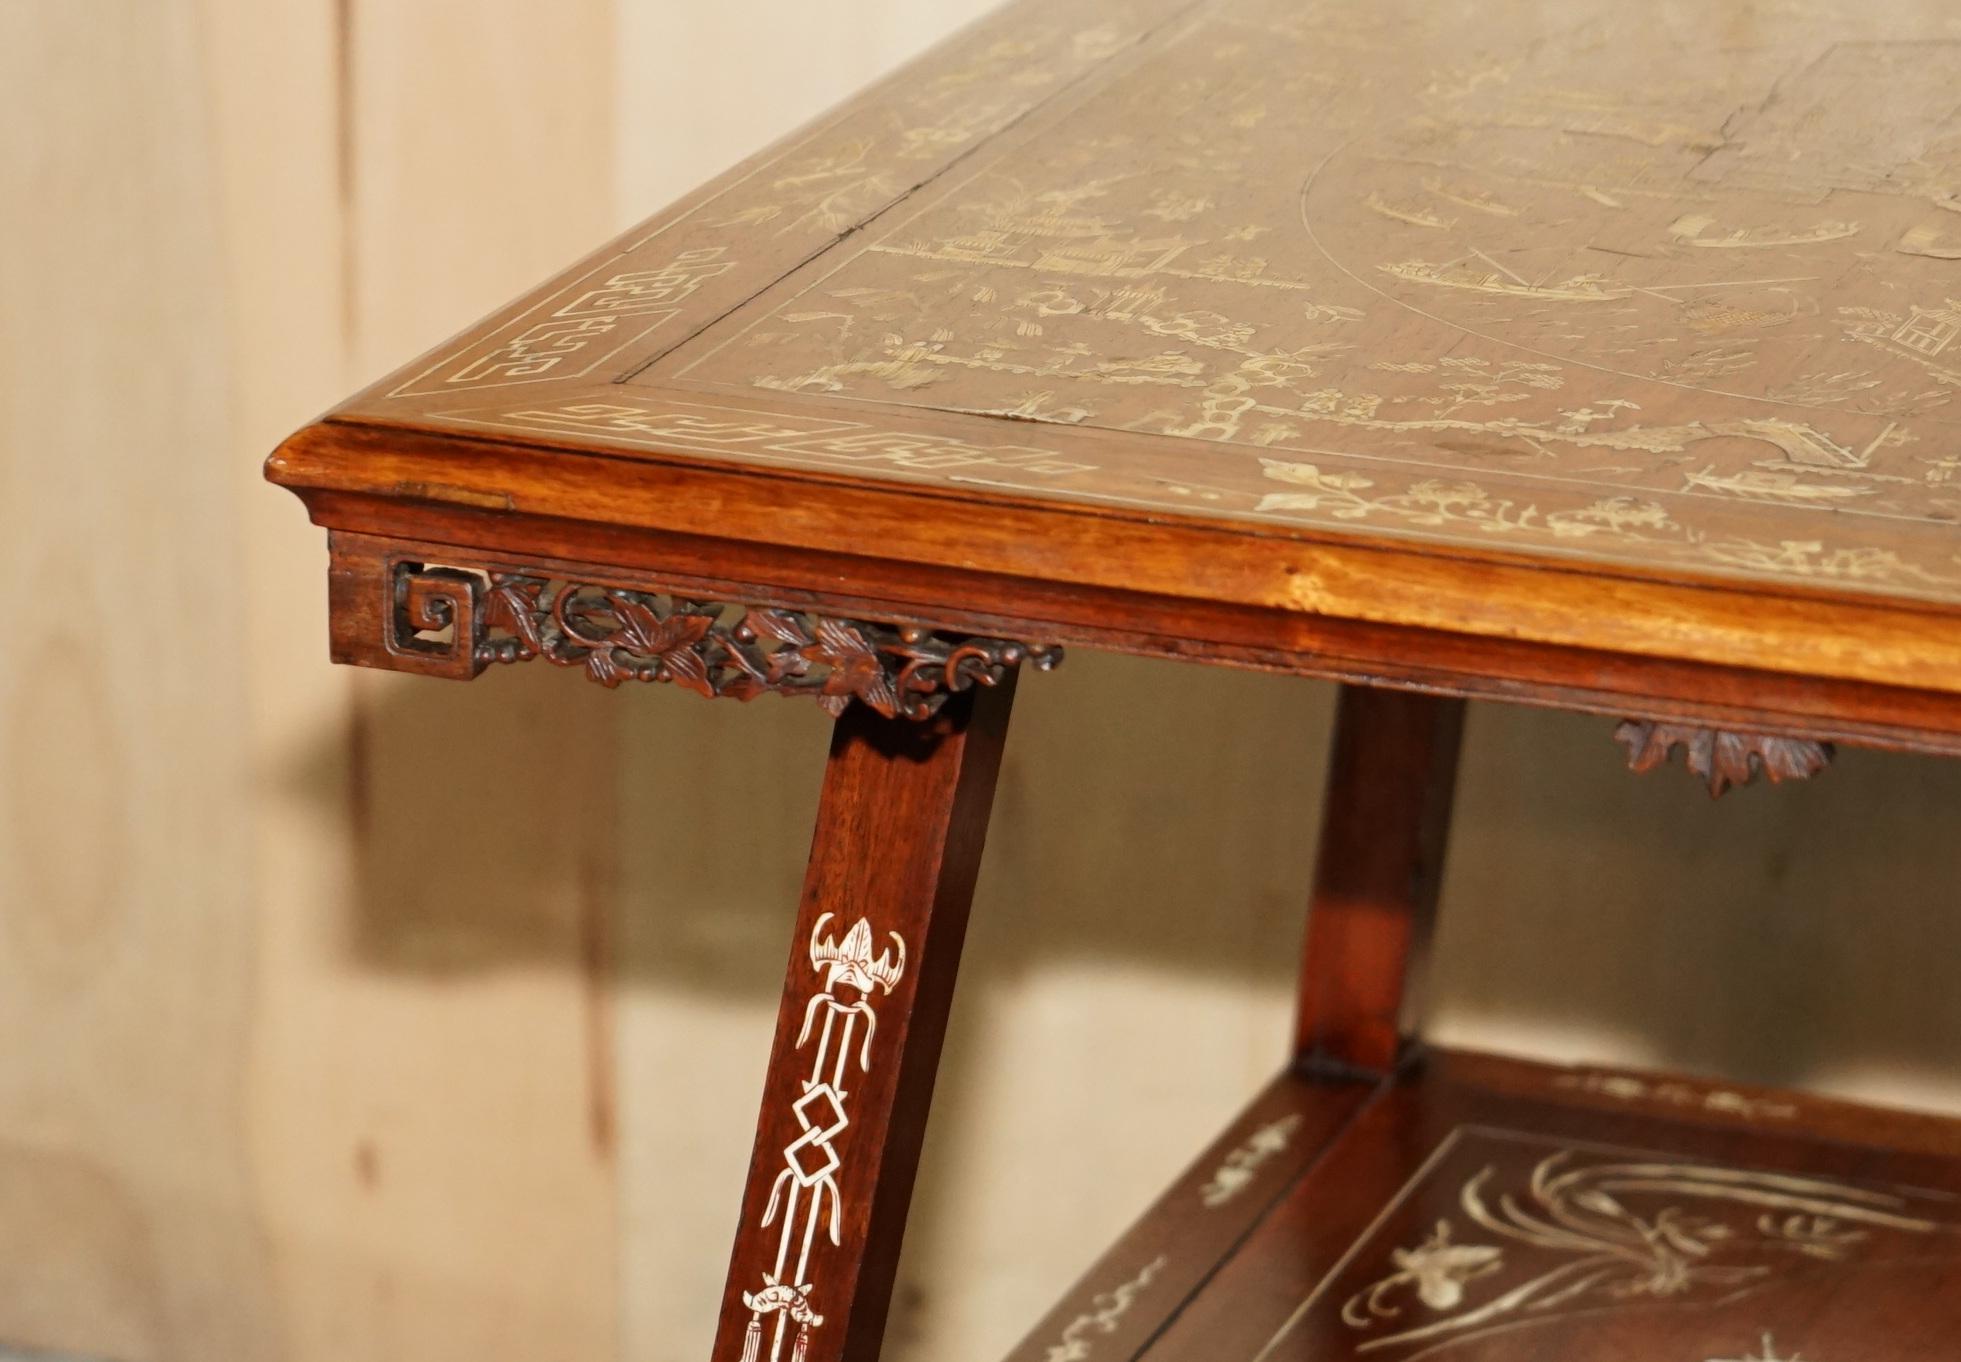 ANTIQUE CIRCA 1900ORNATELY CARVED AND HEAViLY INLAID CHINESE OCCASIONAL TABLE (Chinesisch) im Angebot